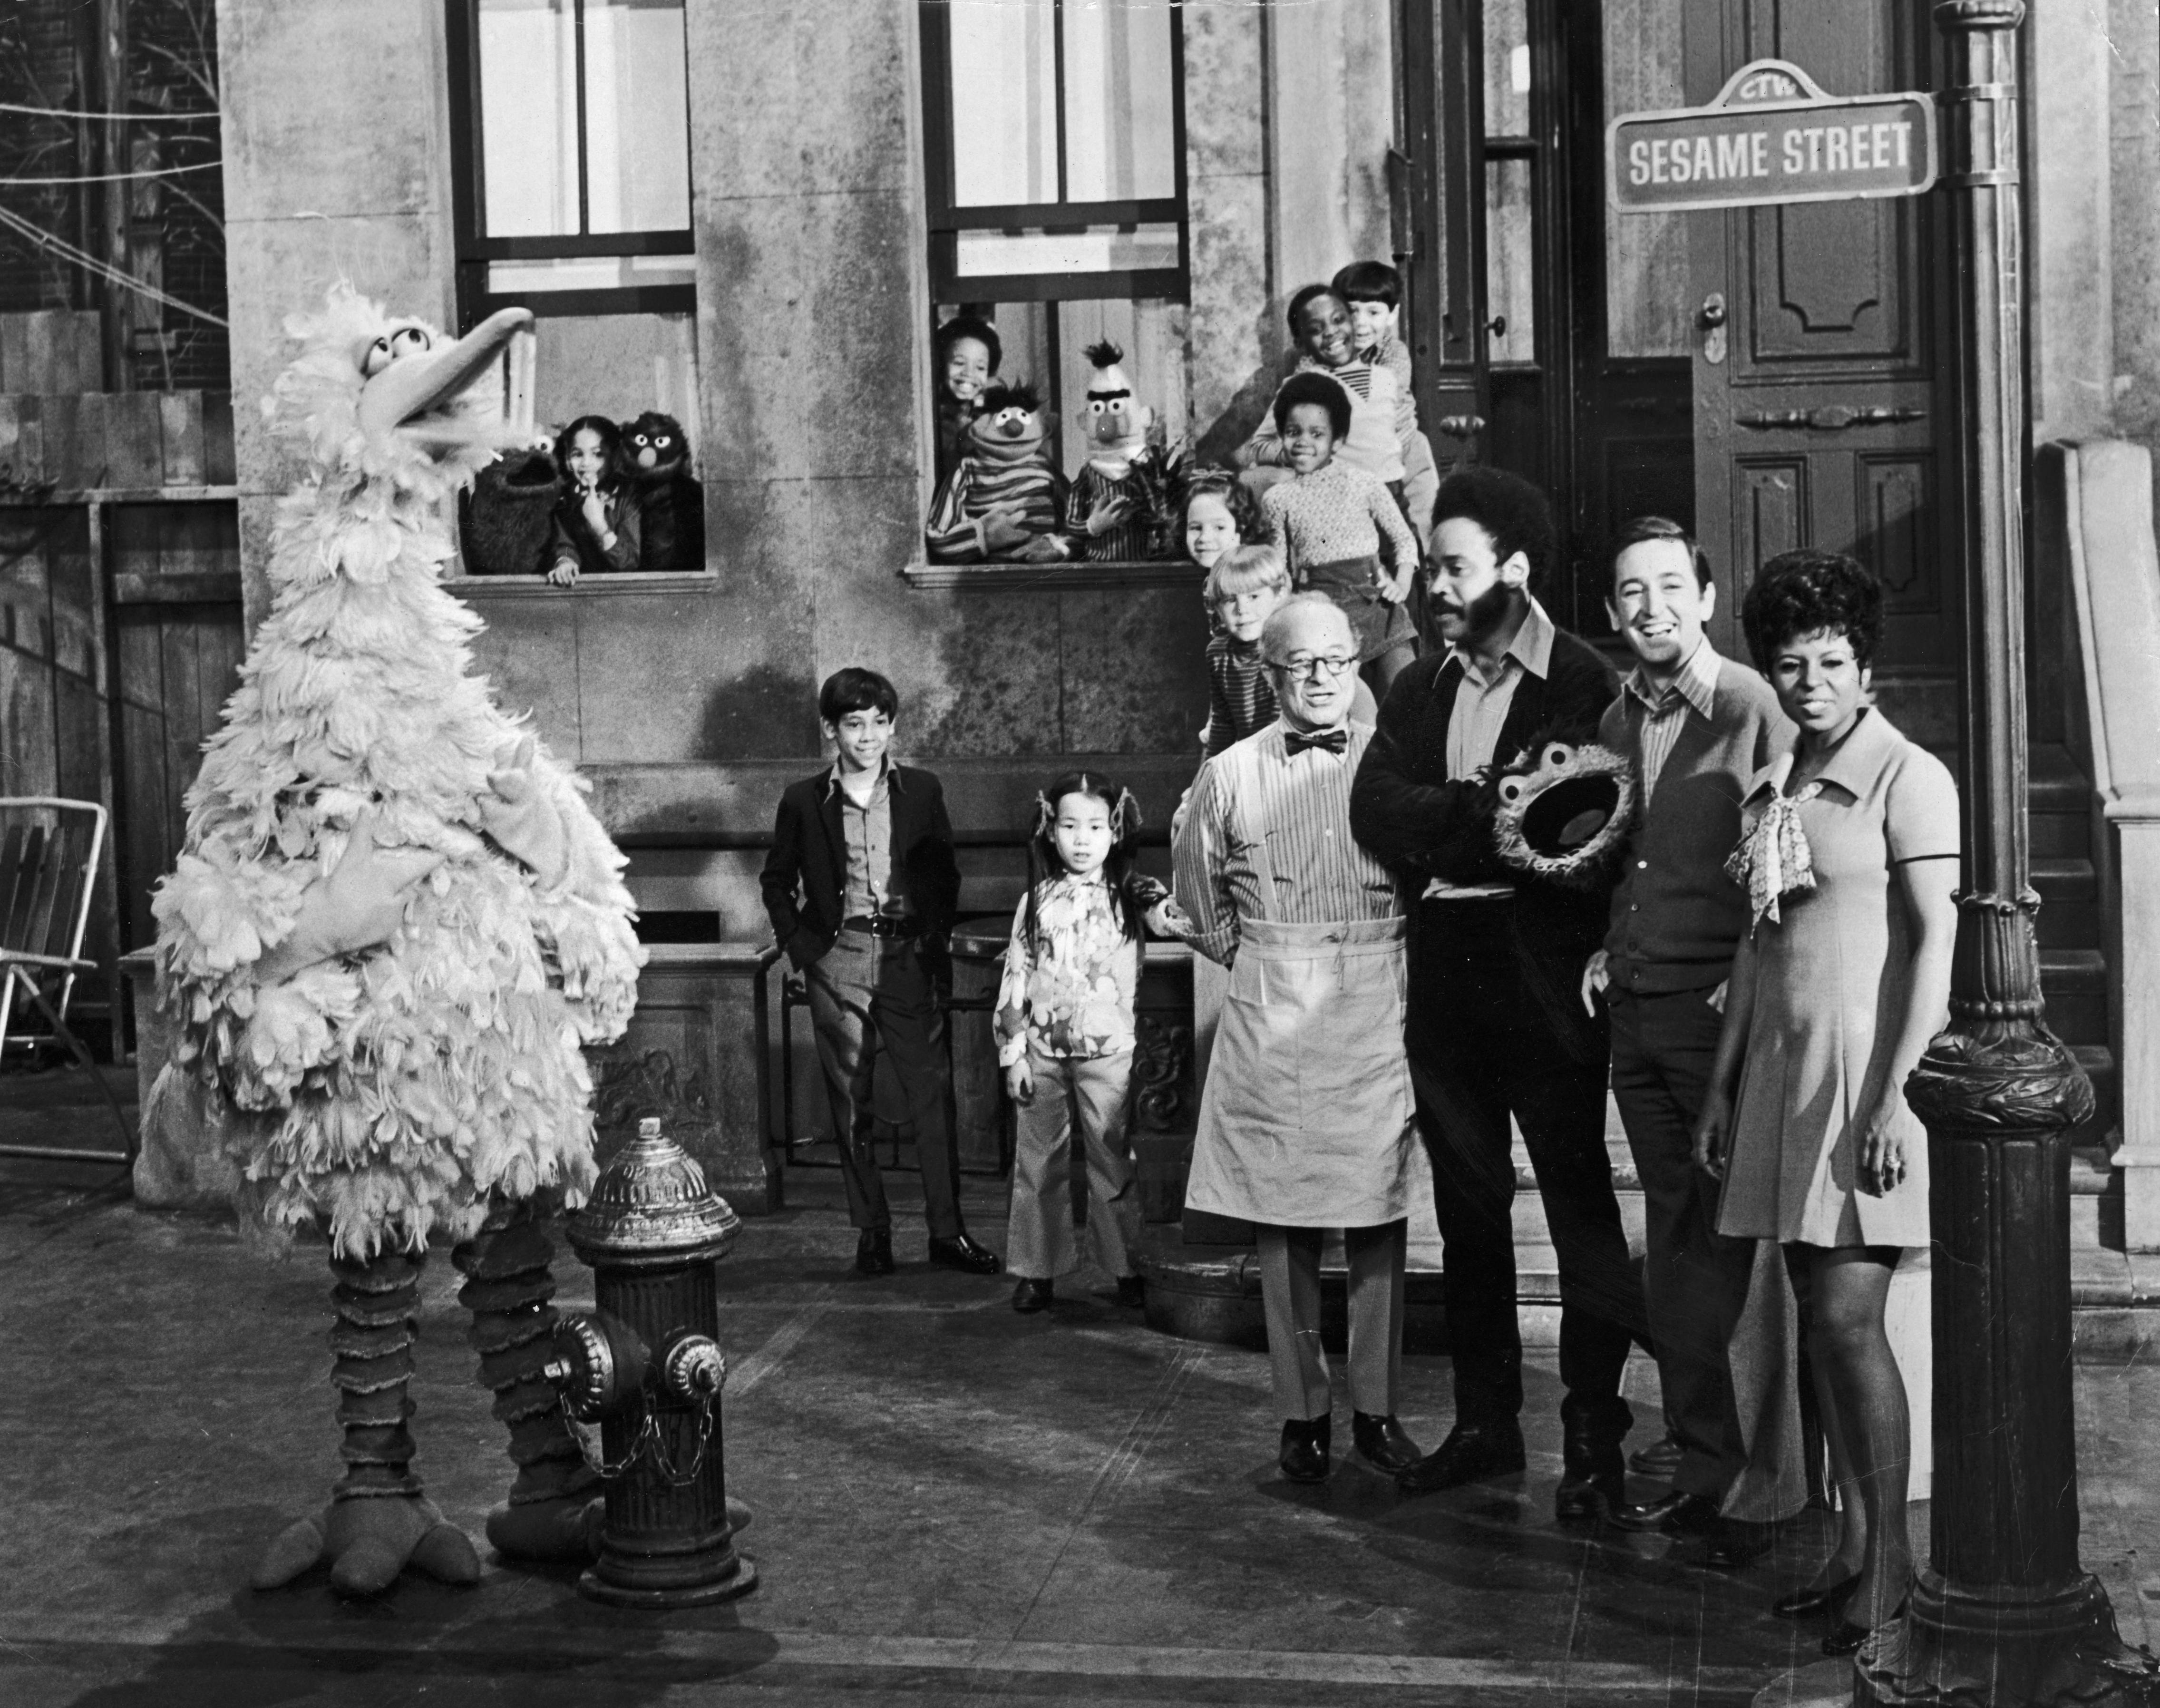 circa 1969:  Cast members of the television show, 'Sesame Street,' posing on the set with some of the puppet characters. Left to right: Will Lee (1908 - 1982), Matt Robinson (1937 - 2002), Bob McGrath and Loretta Long with (left to right) Big Bird, Cookie Monster, Grover, Ernie, Bert and Oscar the Grouch.  (Photo by Hulton Archive/Getty Images)